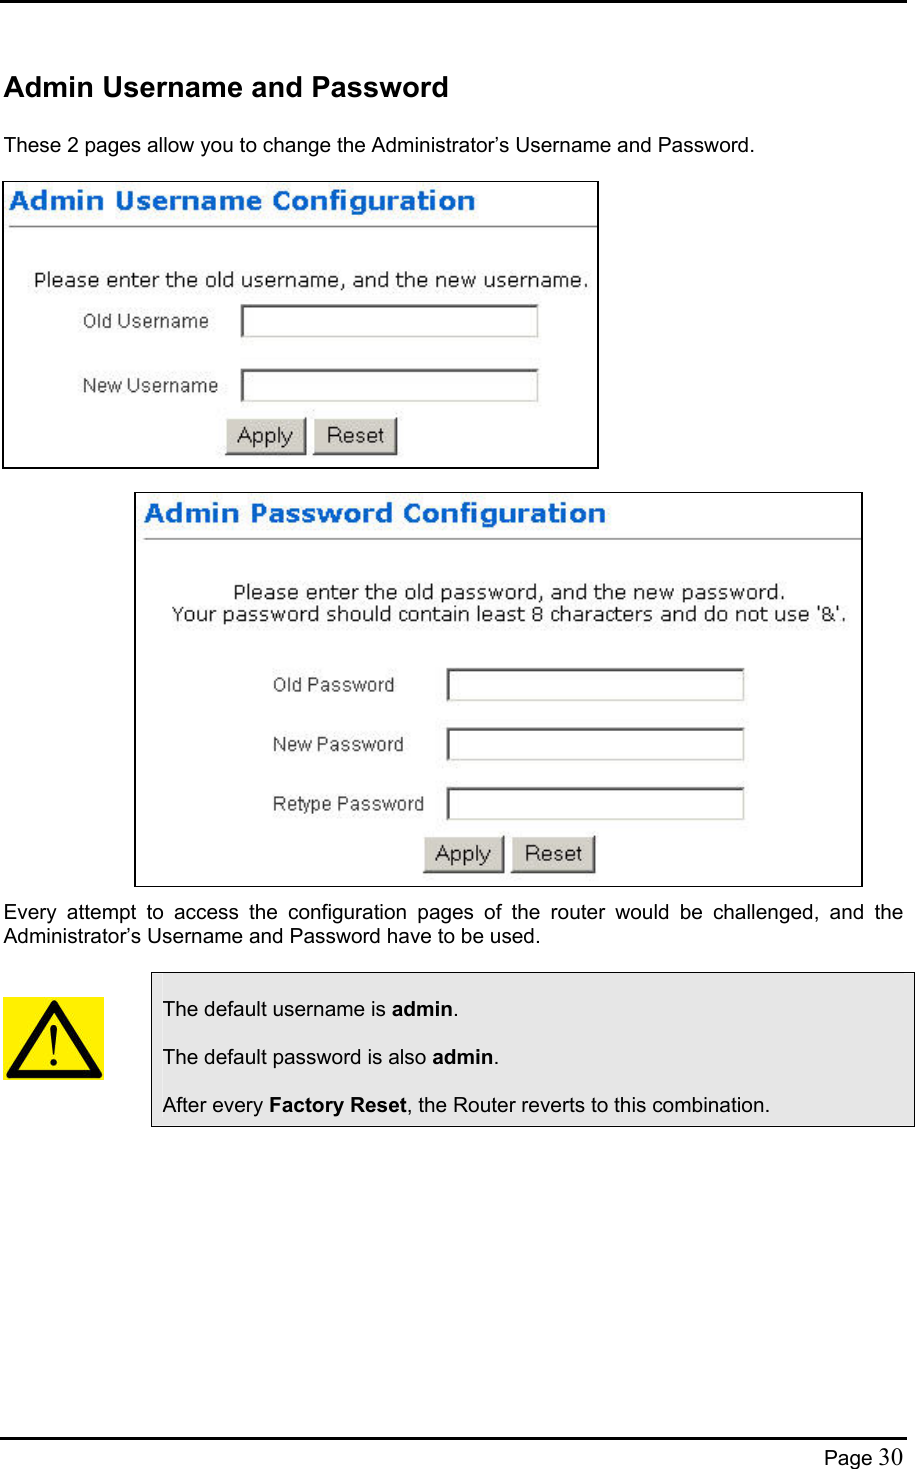  Admin Username and Password  These 2 pages allow you to change the Administrator’s Username and Password.                                Every attempt to access the configuration pages of the router would be challenged, and the Administrator’s Username and Password have to be used.       The default username is admin.  The default password is also admin.  After every Factory Reset, the Router reverts to this combination.  Page 30 